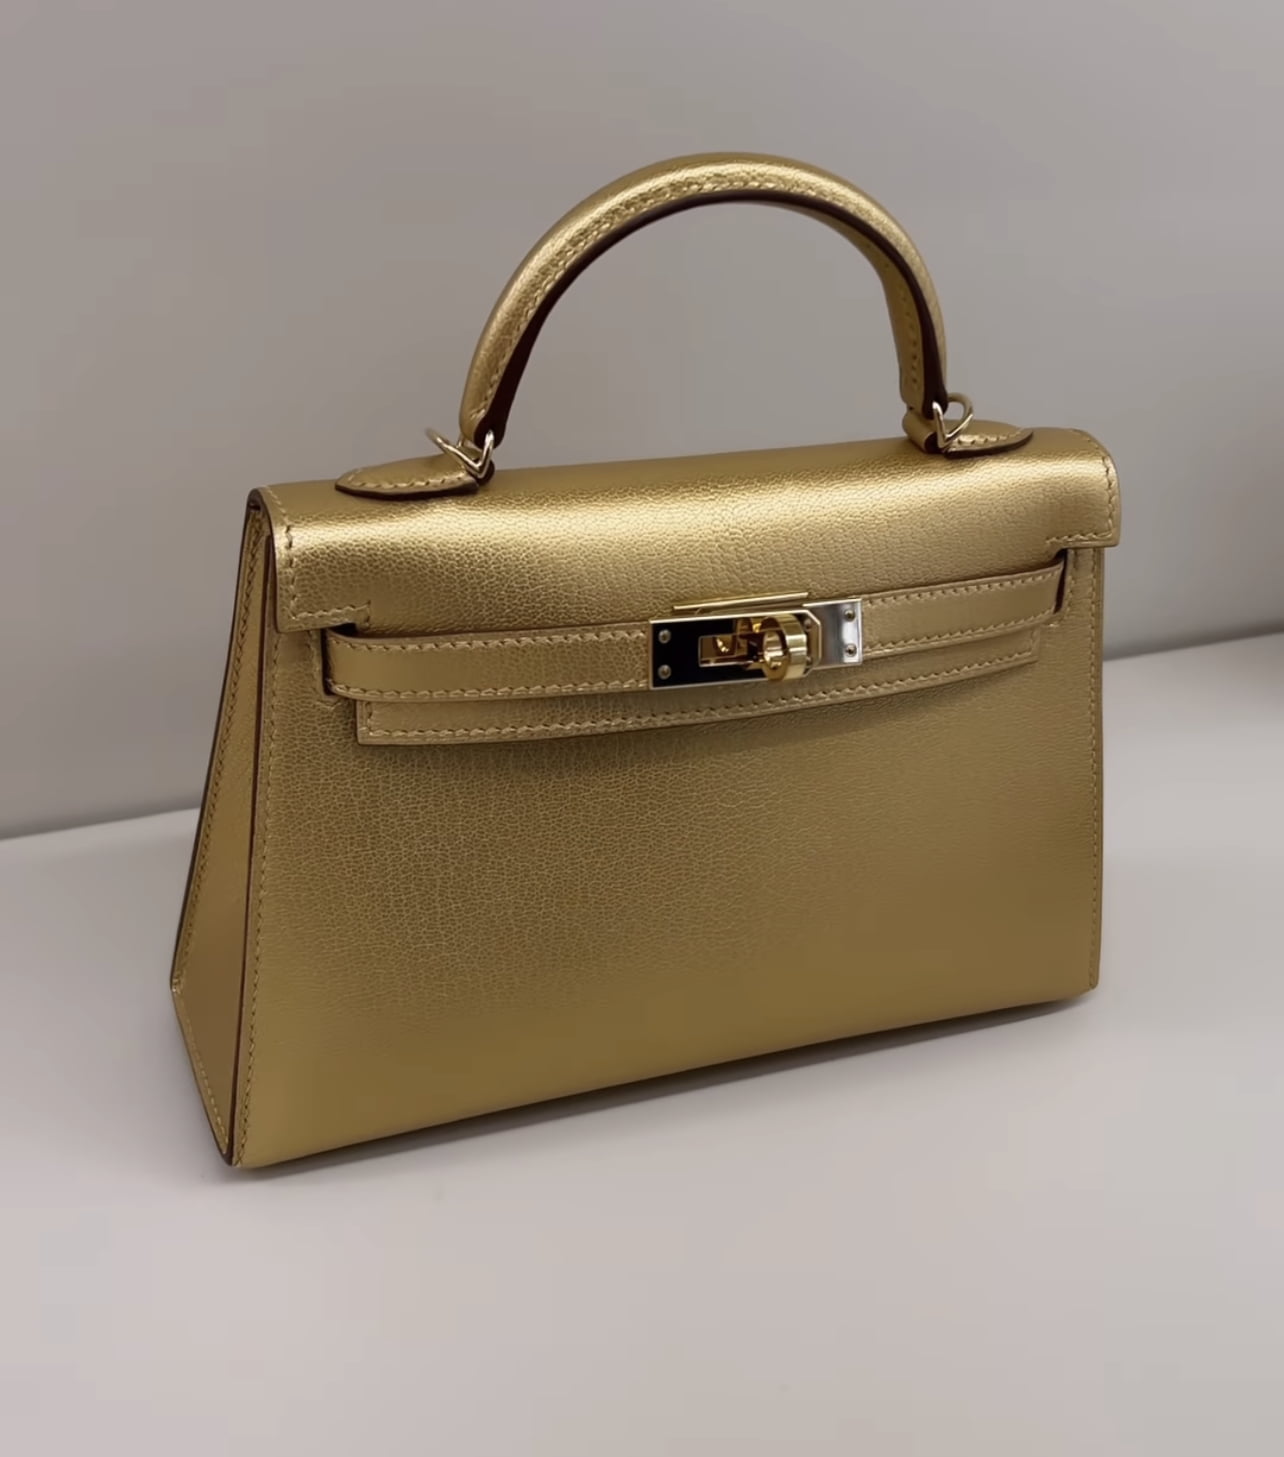 Hermès Kelly Prices In 2023: All The Information You Need